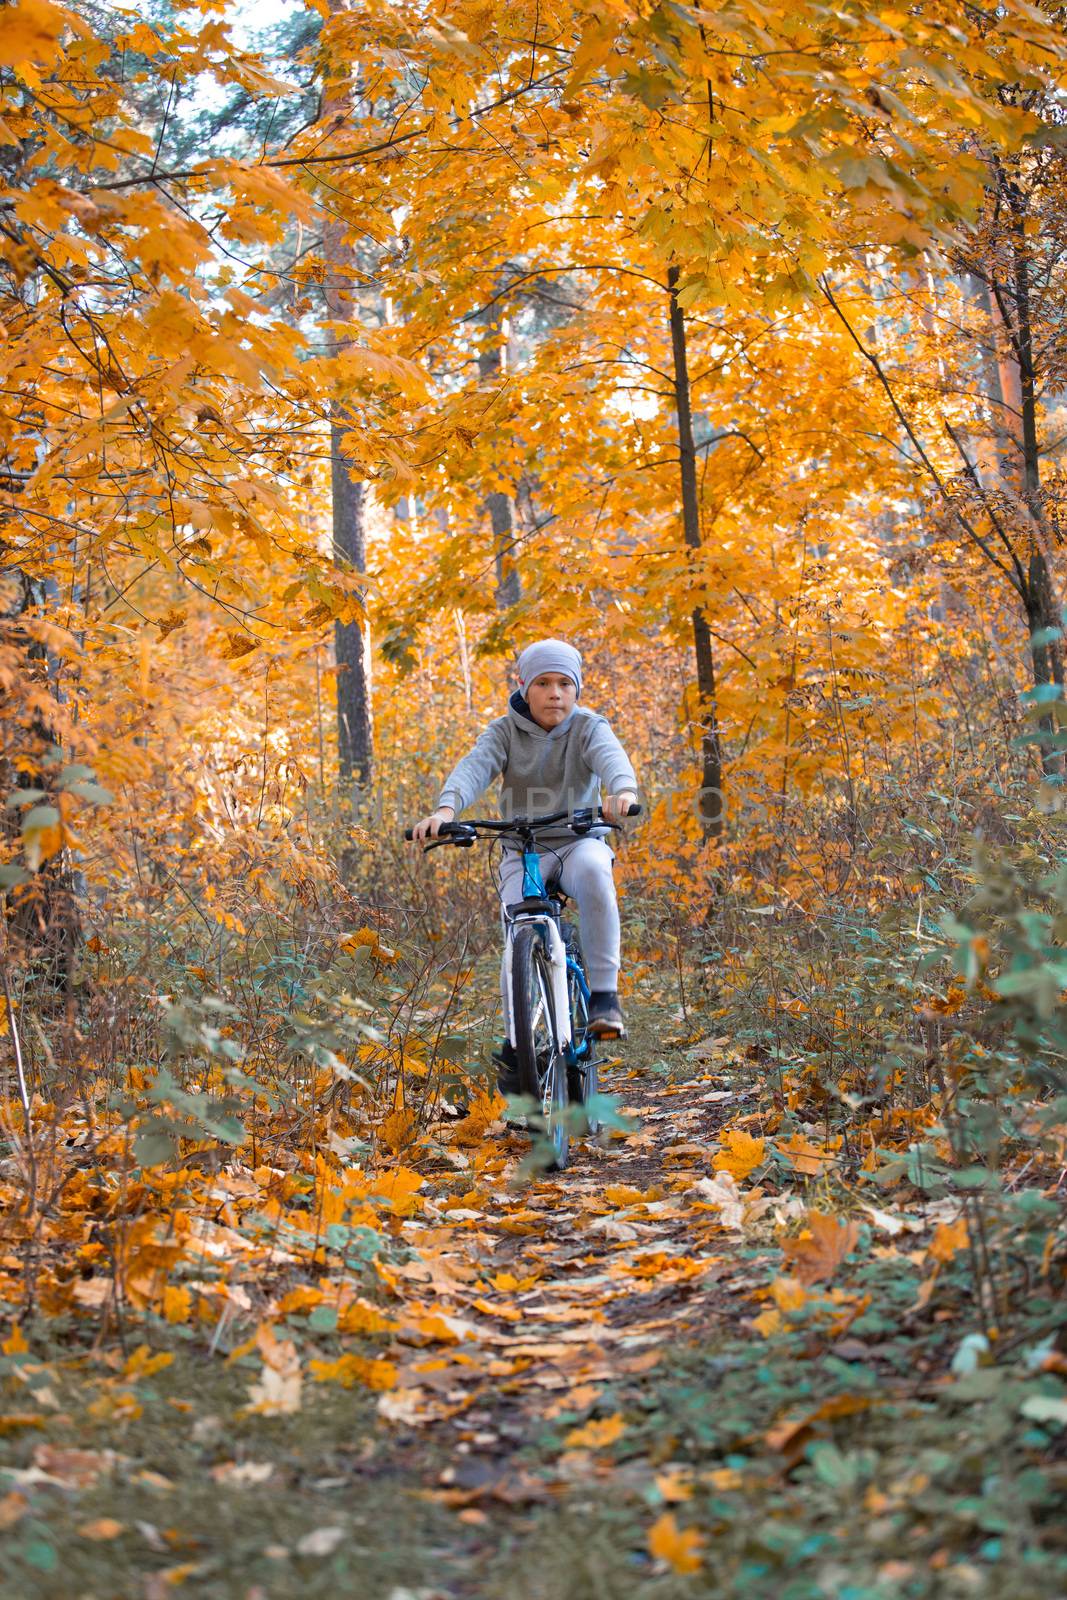 Boy riding bicycle in autumn orange maple tree park on a dirt road in the woods